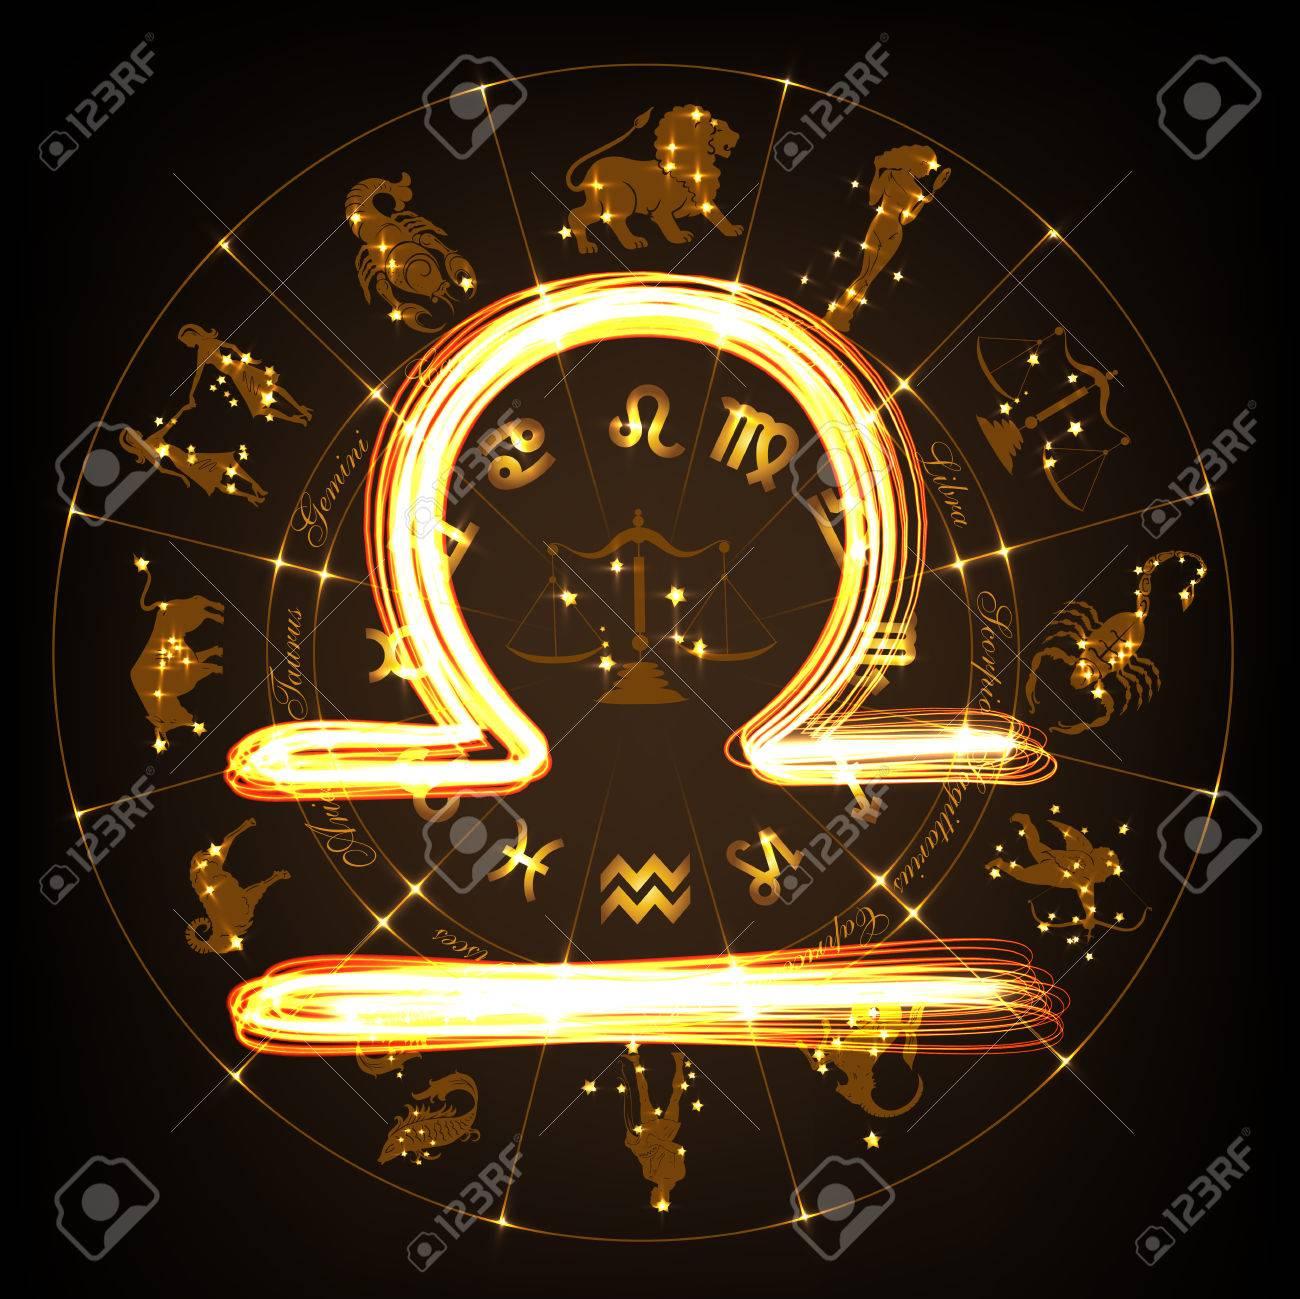 Zodiac Sign Libra In Fire Show Style On Horoscope Circle